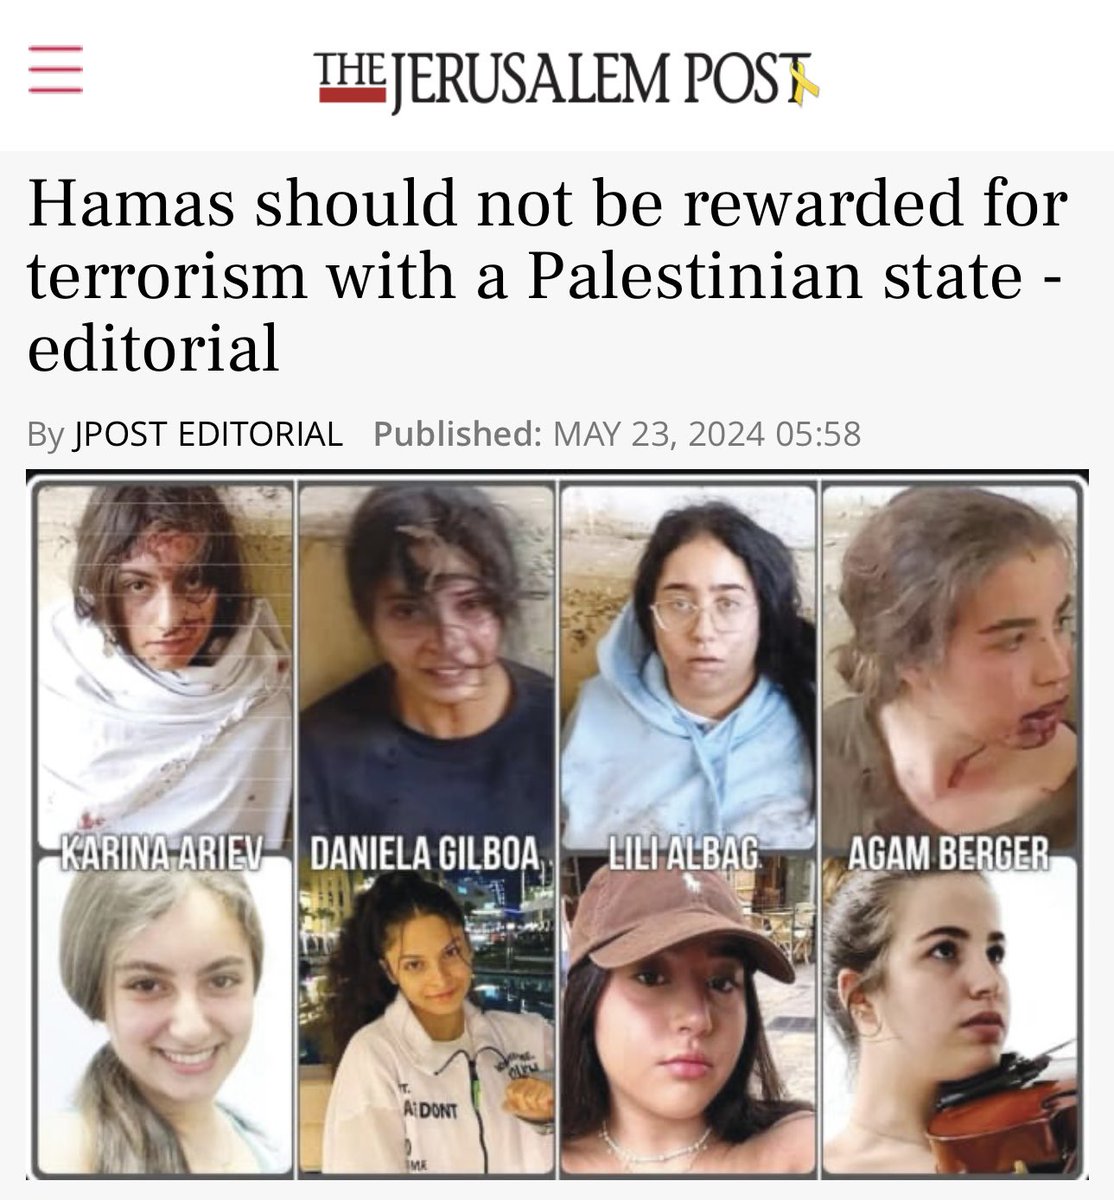 Some members of Congress refuse to condemn this raw brutality.

Calling for a Palestinian state or supporting the ICC request for arrest warrants—it’s all a warped interpretation of justice, but also anathema to peace and bringing all hostages back home.